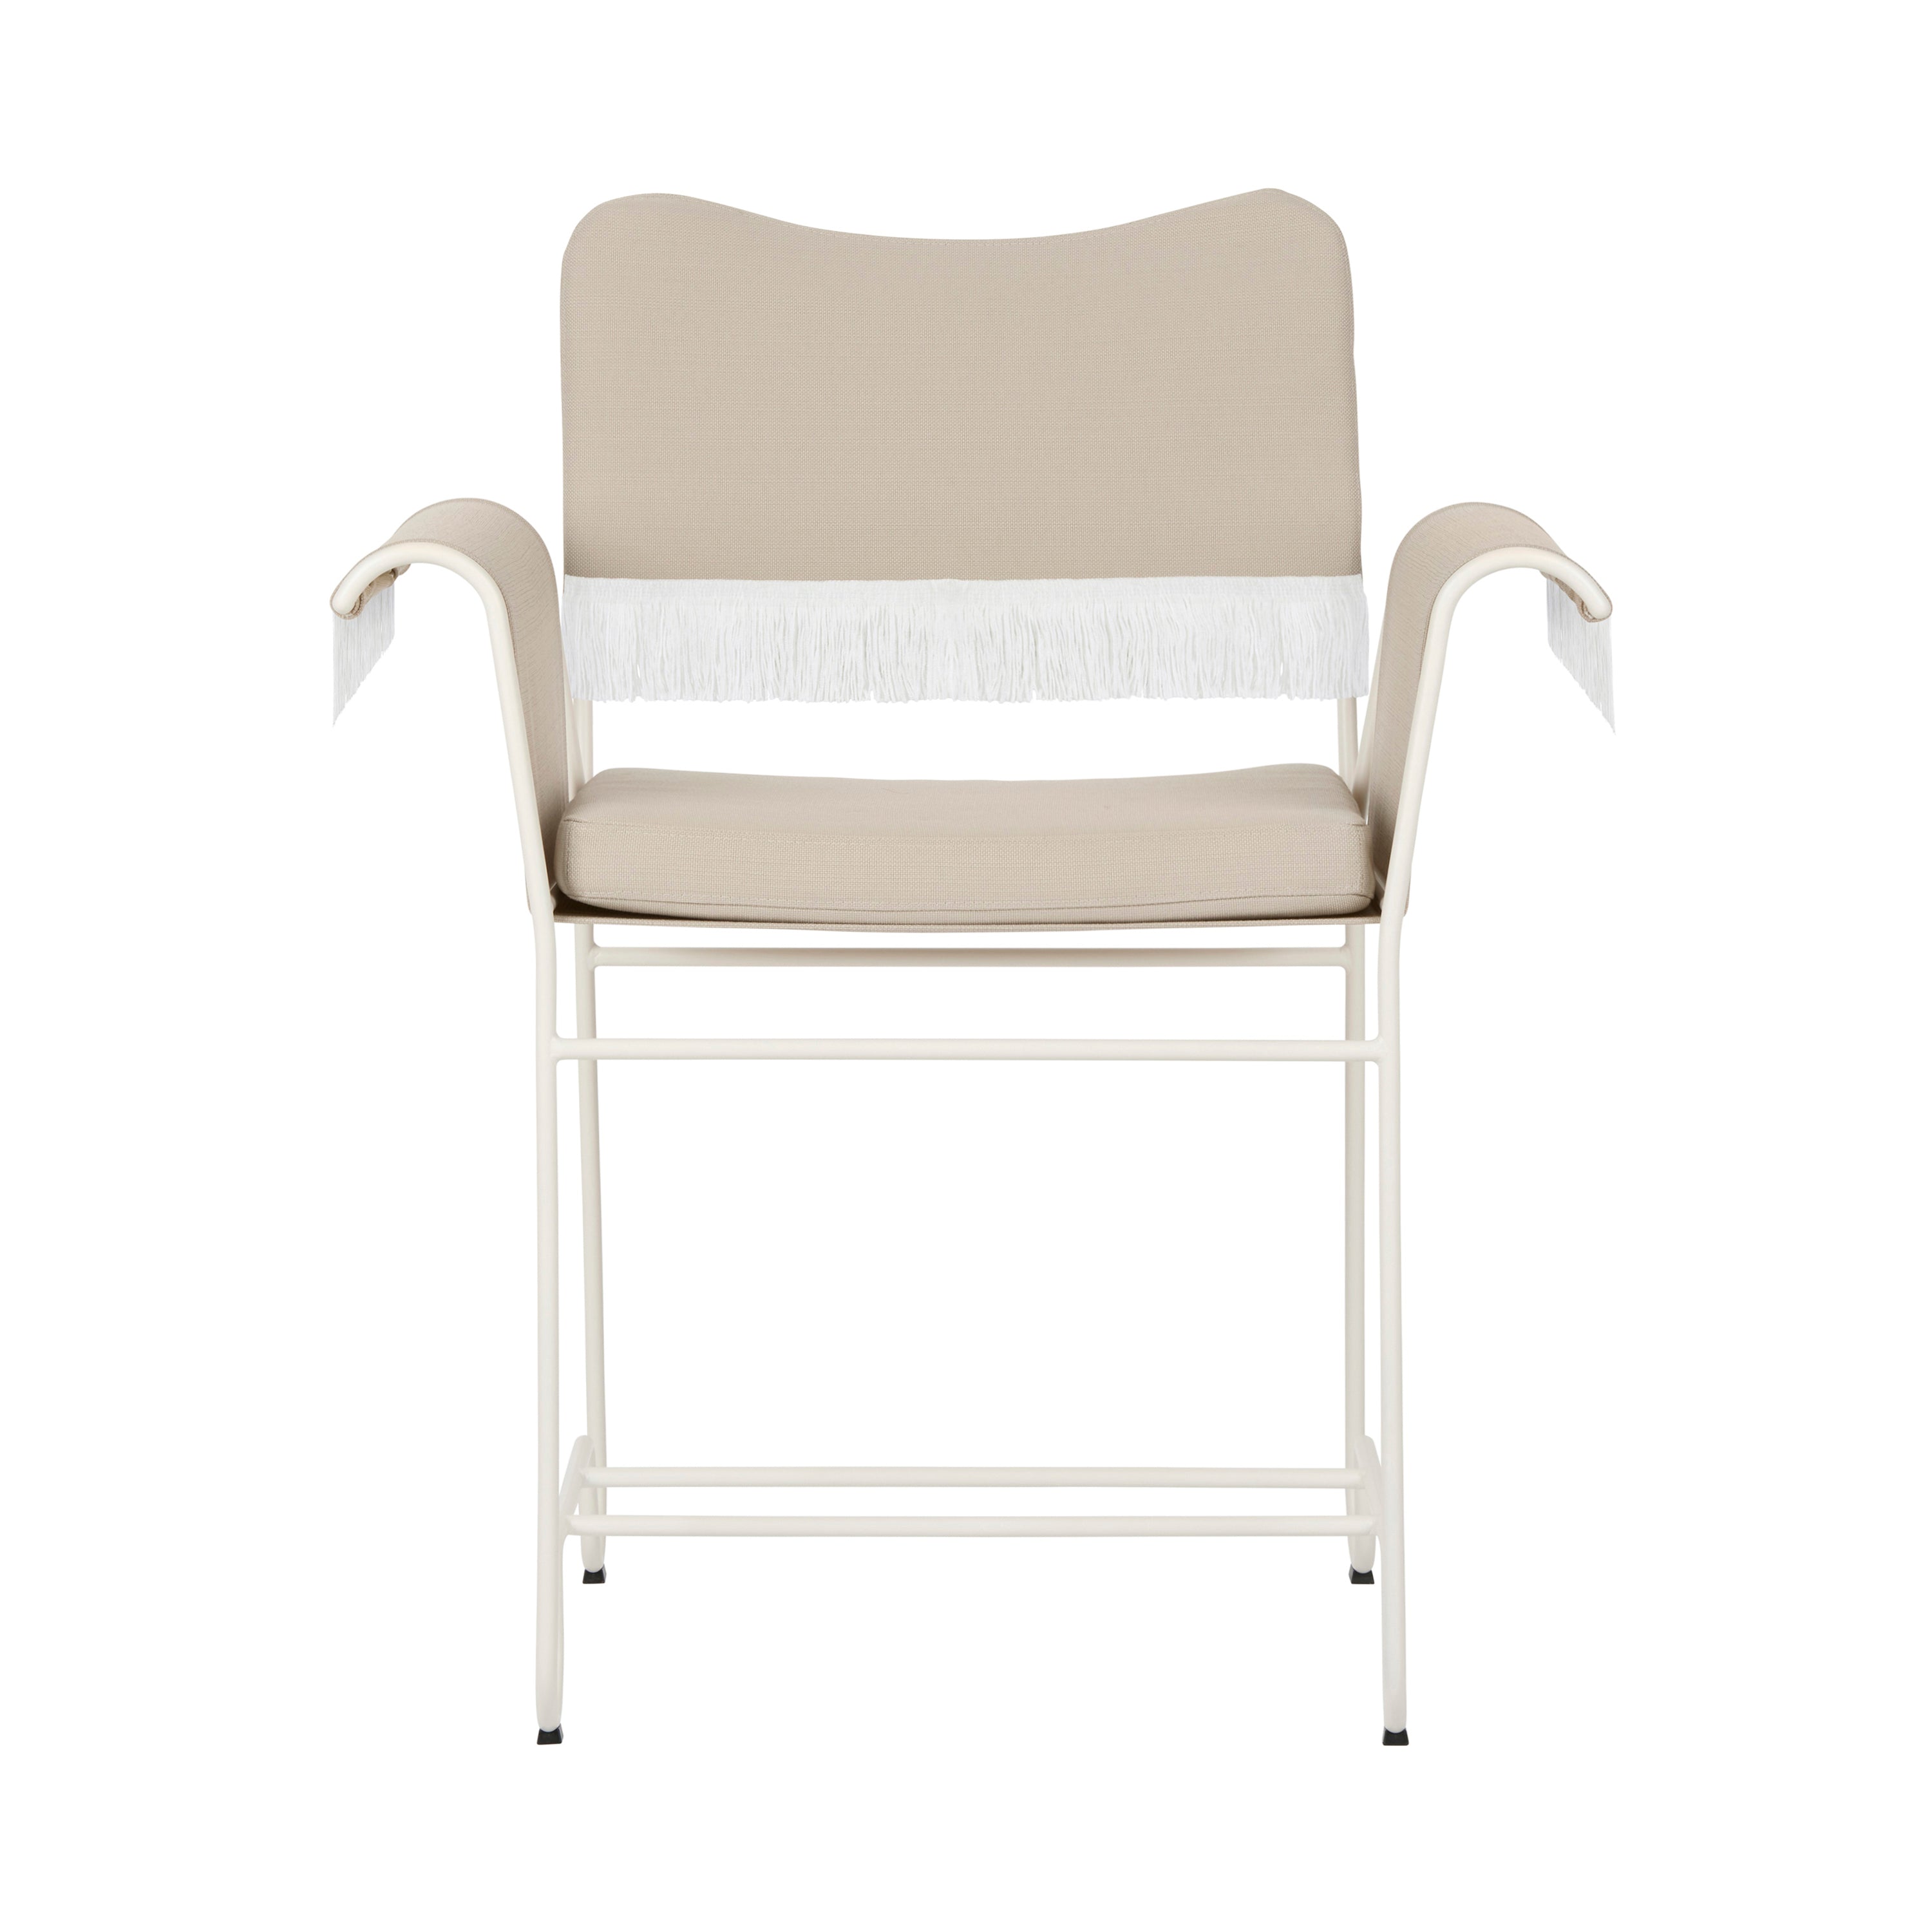 Tropique Dining Chair: Outdoor + With Fringes + White Semi Matt + Leslie 12